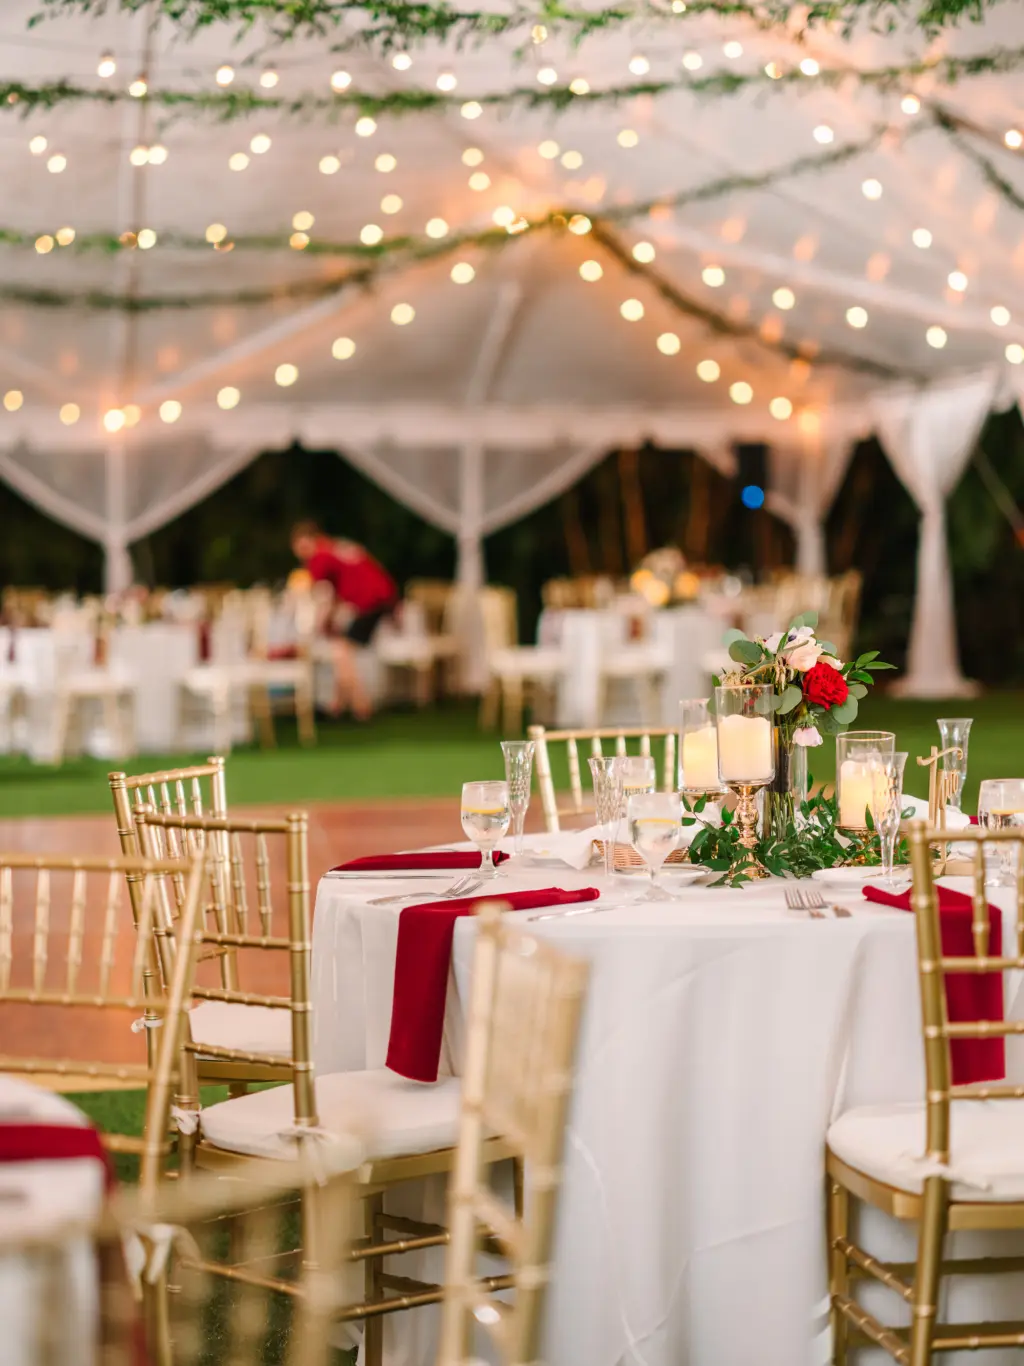 White and Red Christmas Inspired Wedding Reception Decor Ideas | Downtown St. Petersburg Florida Event Venue Sunken Gardens